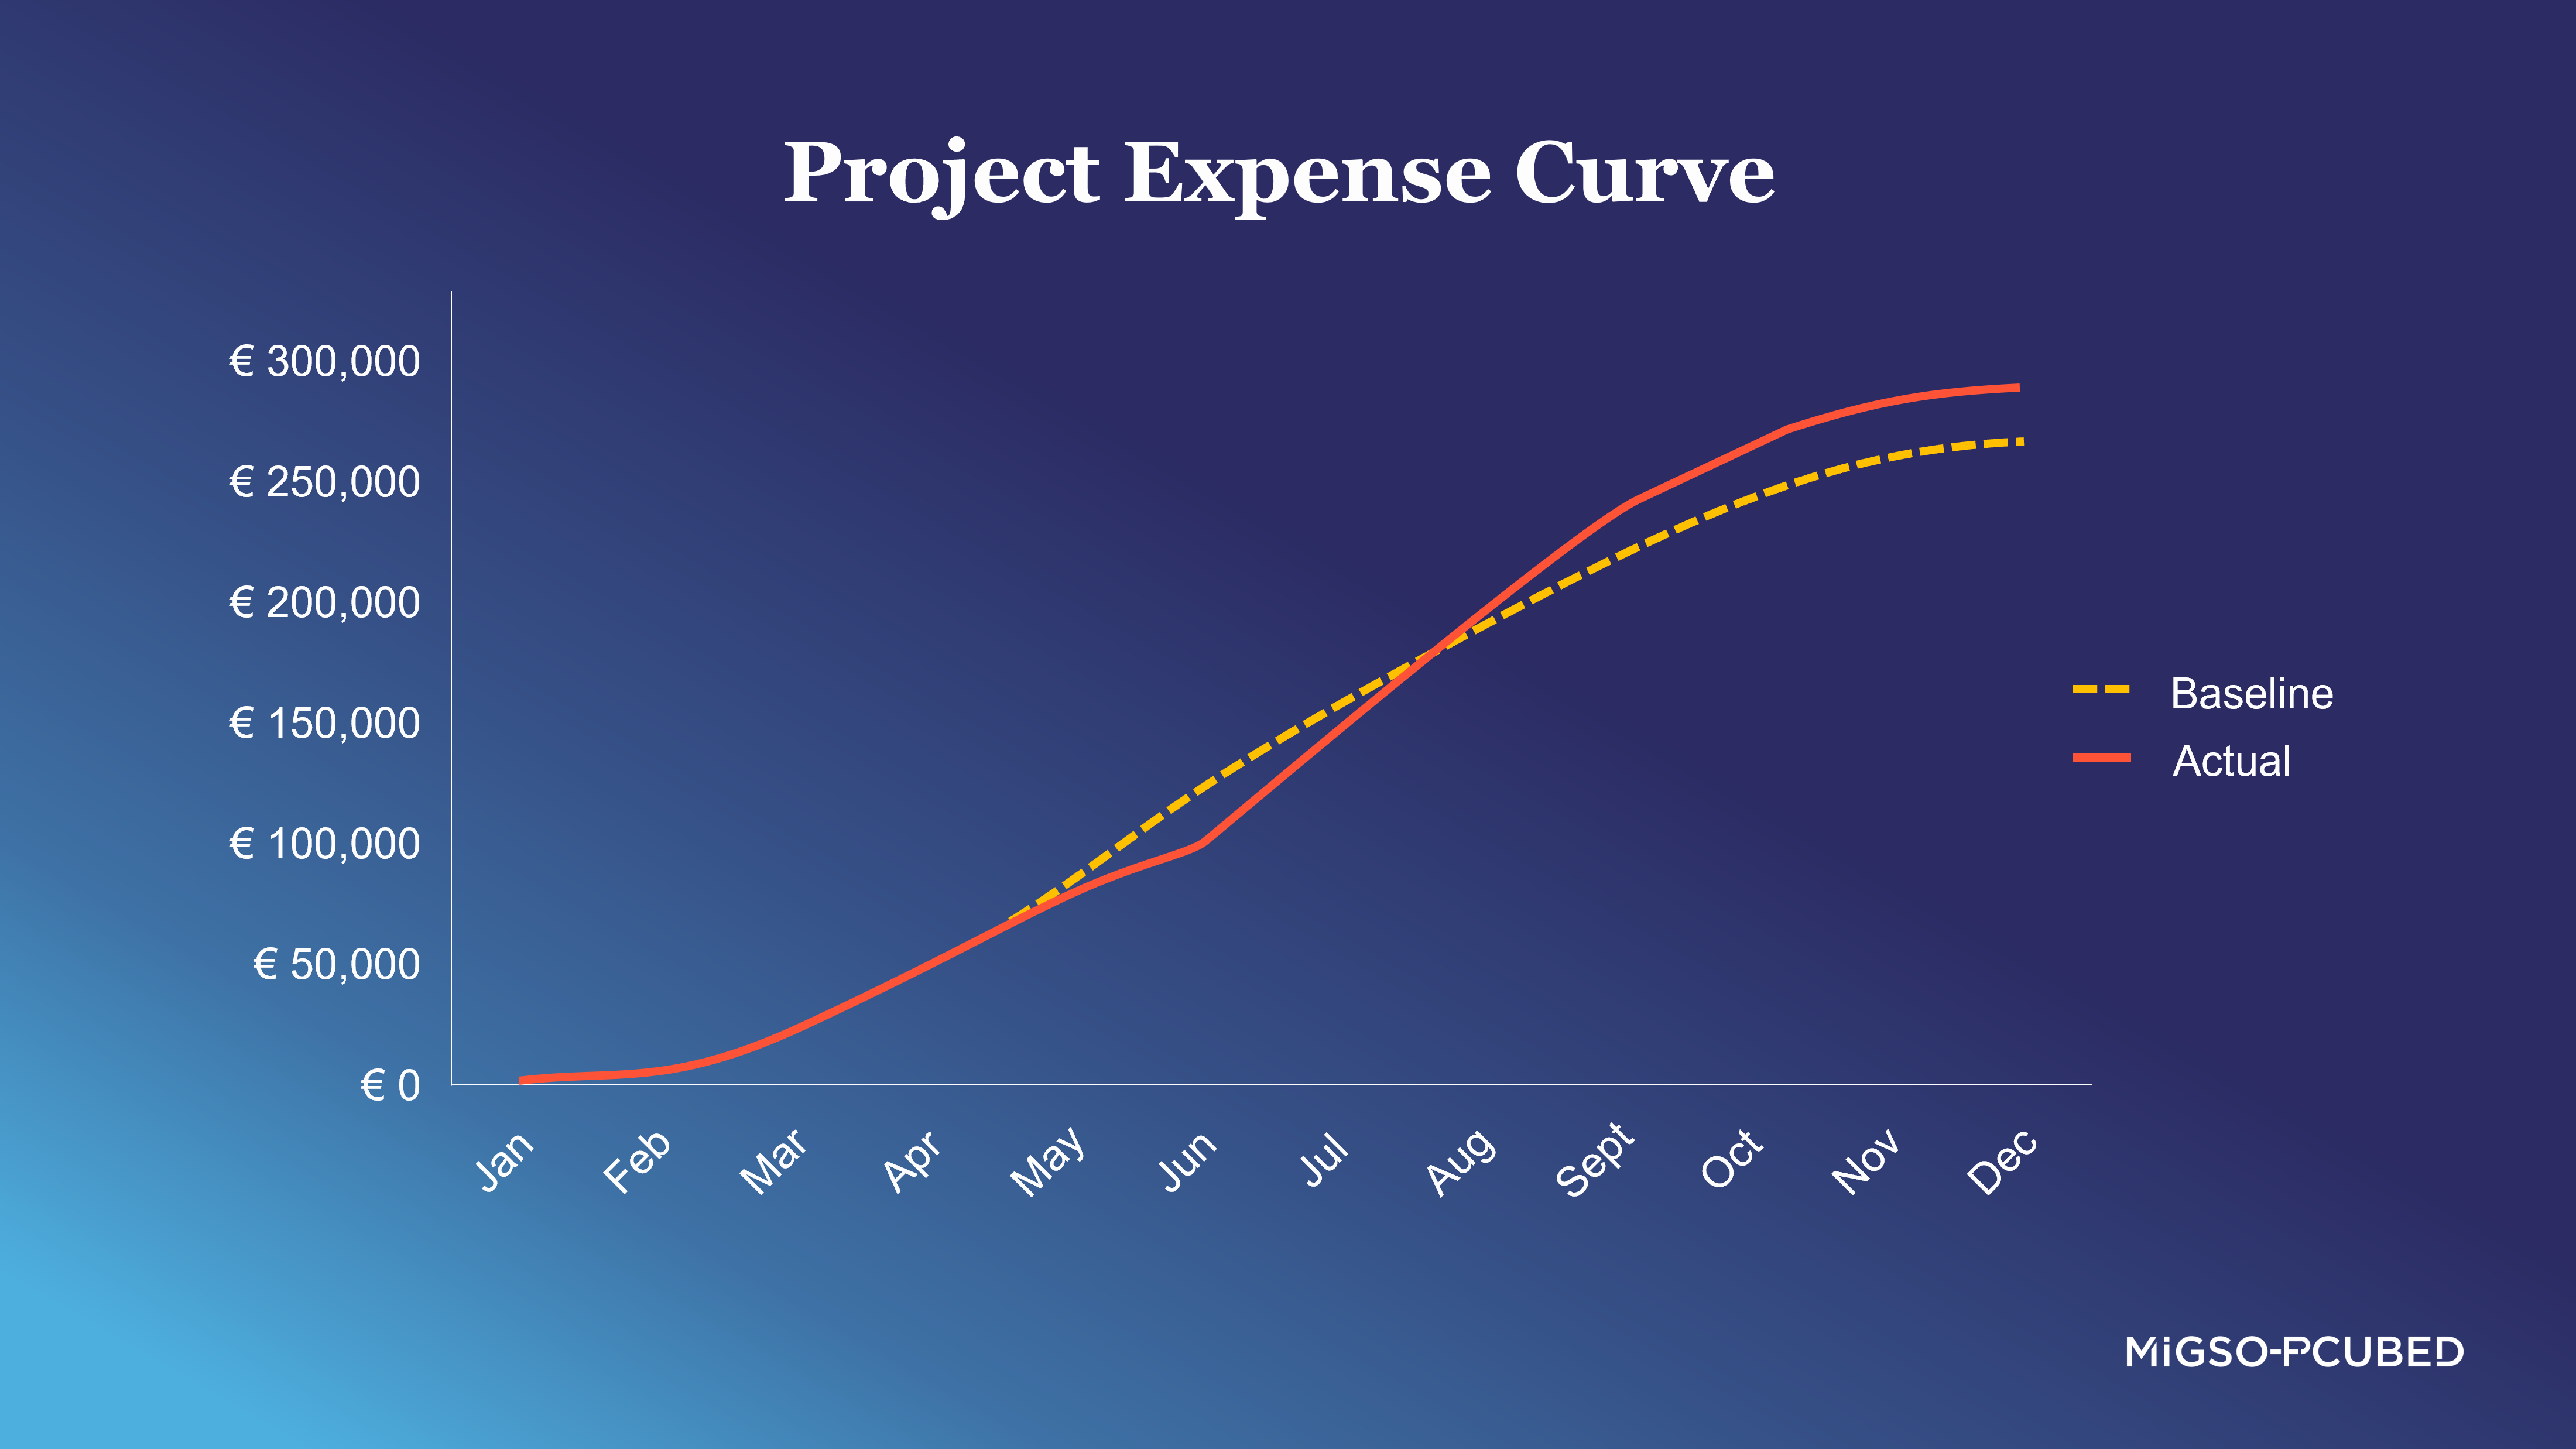 Project expense curve showing the baseline vs actual costs in a construction project